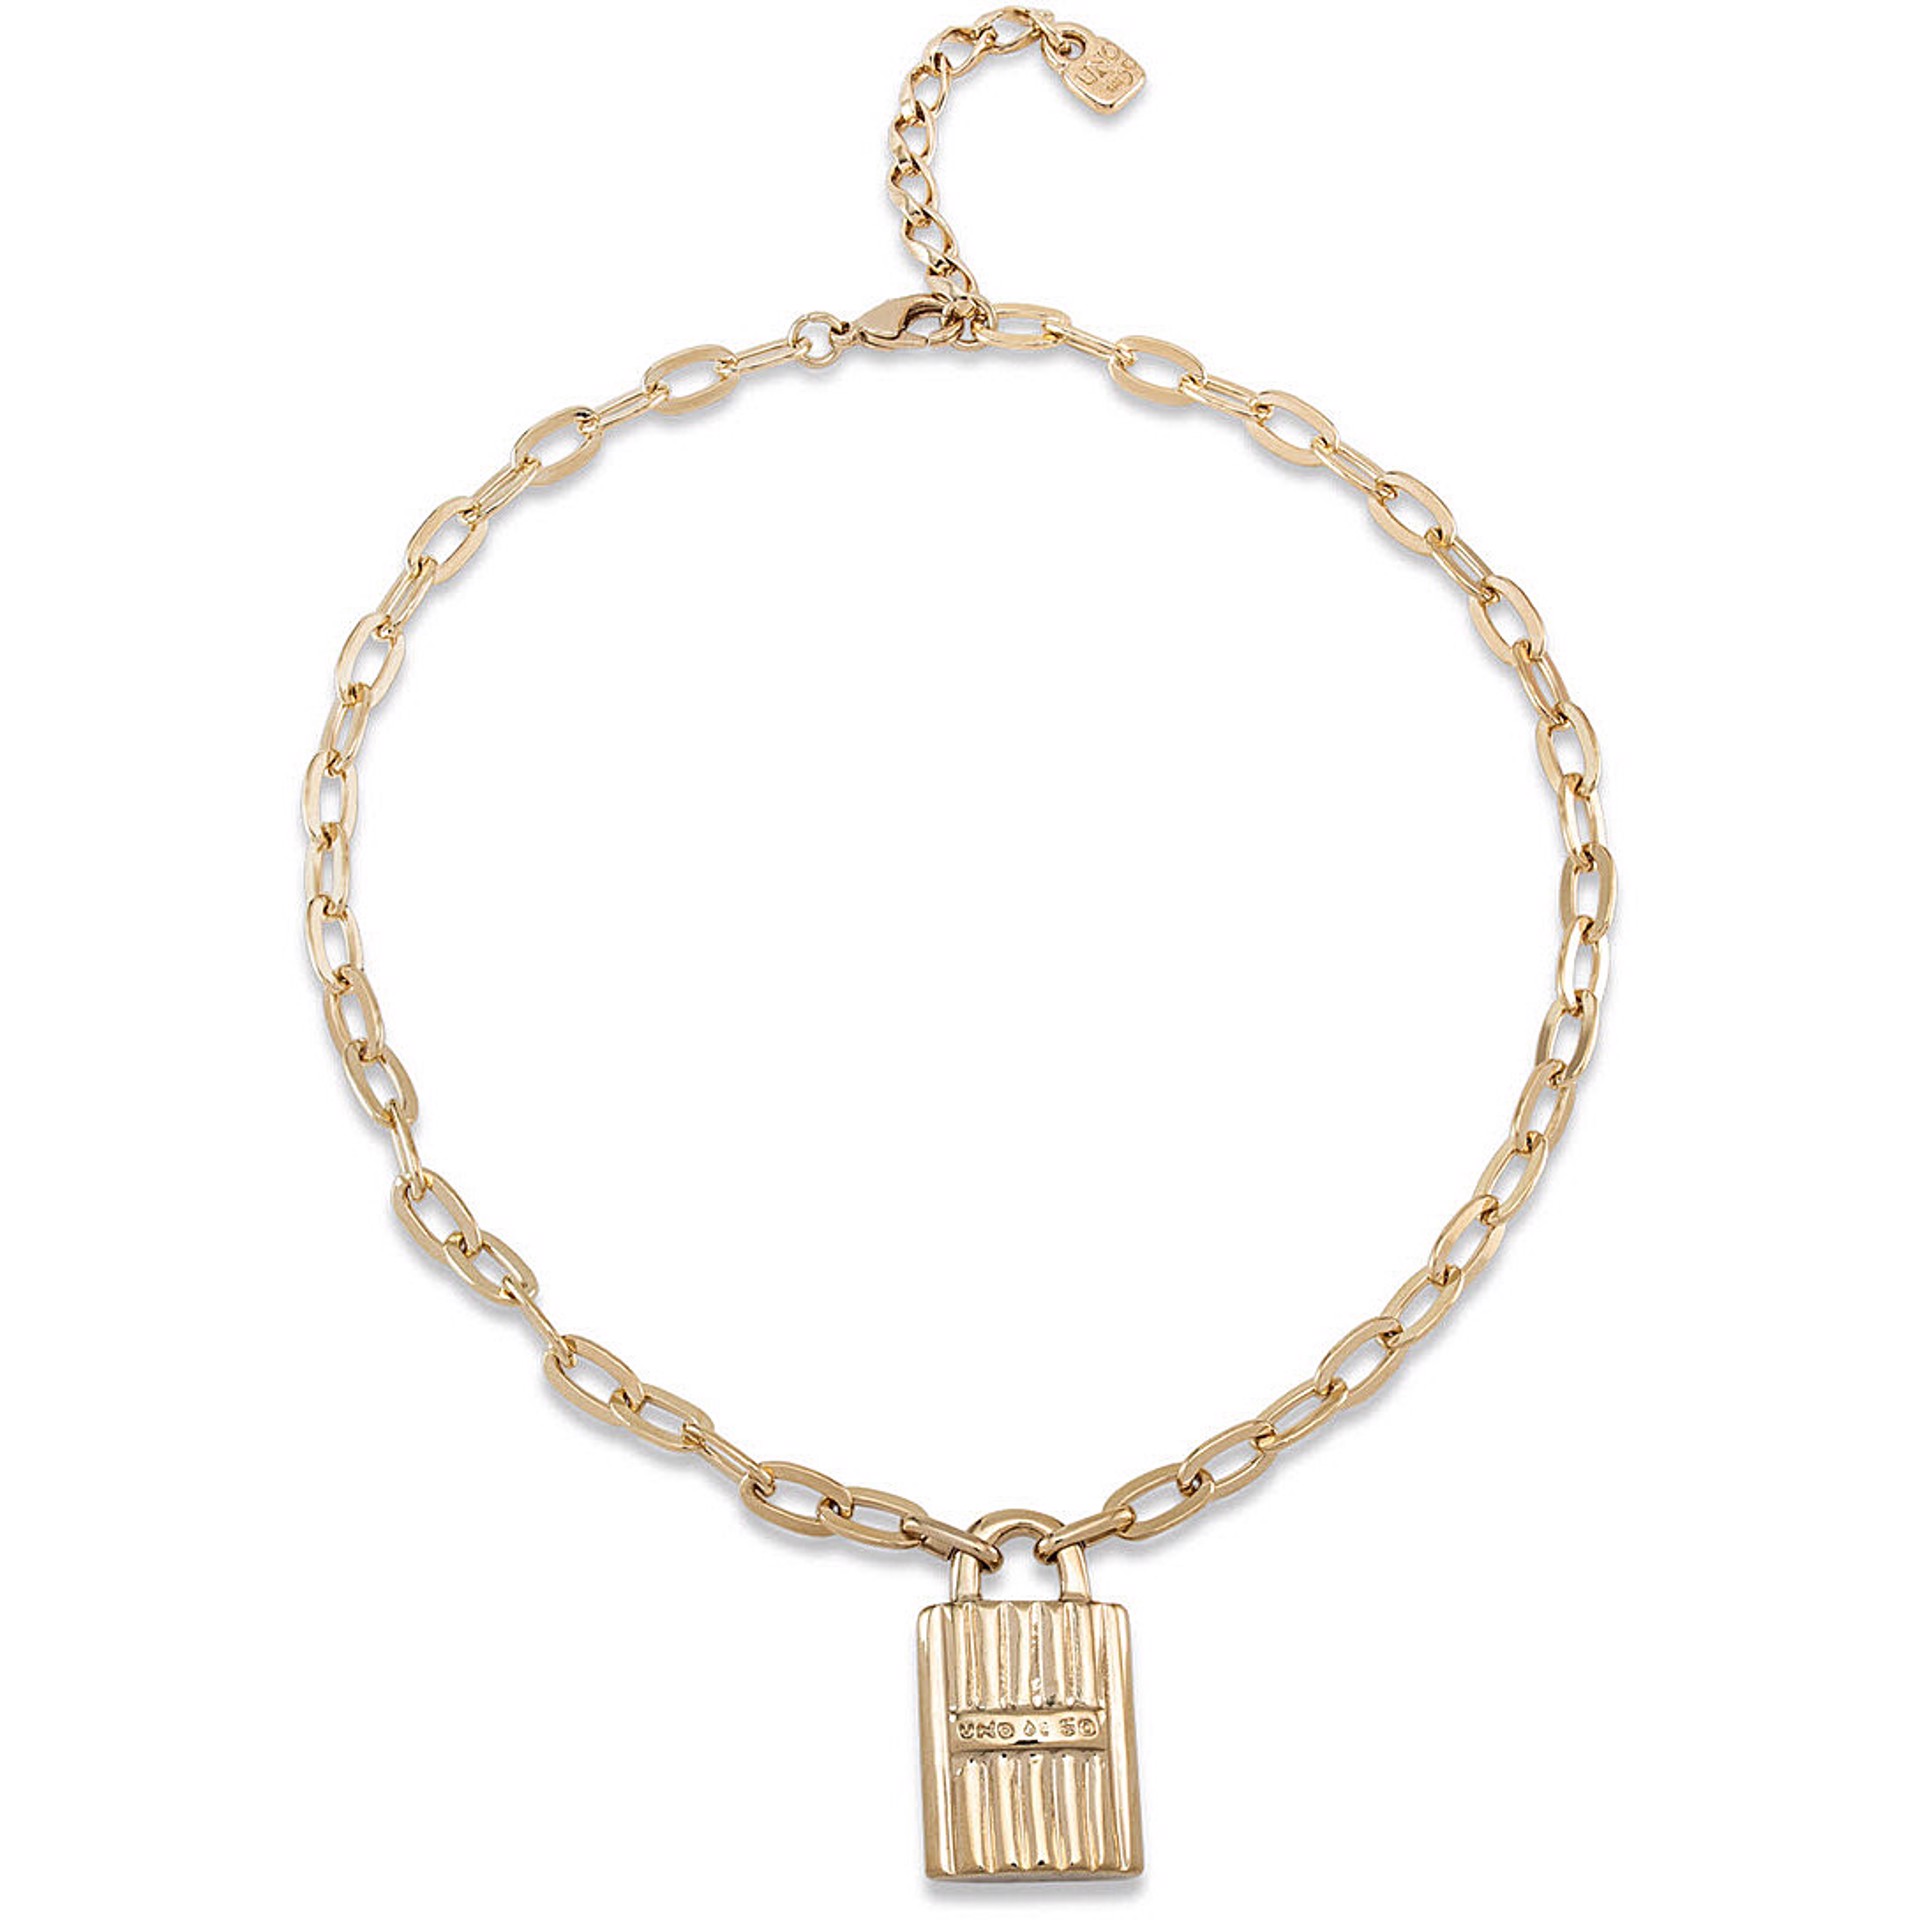 9444 Gold Chain Choker with Lock Charm by UNO DE 50